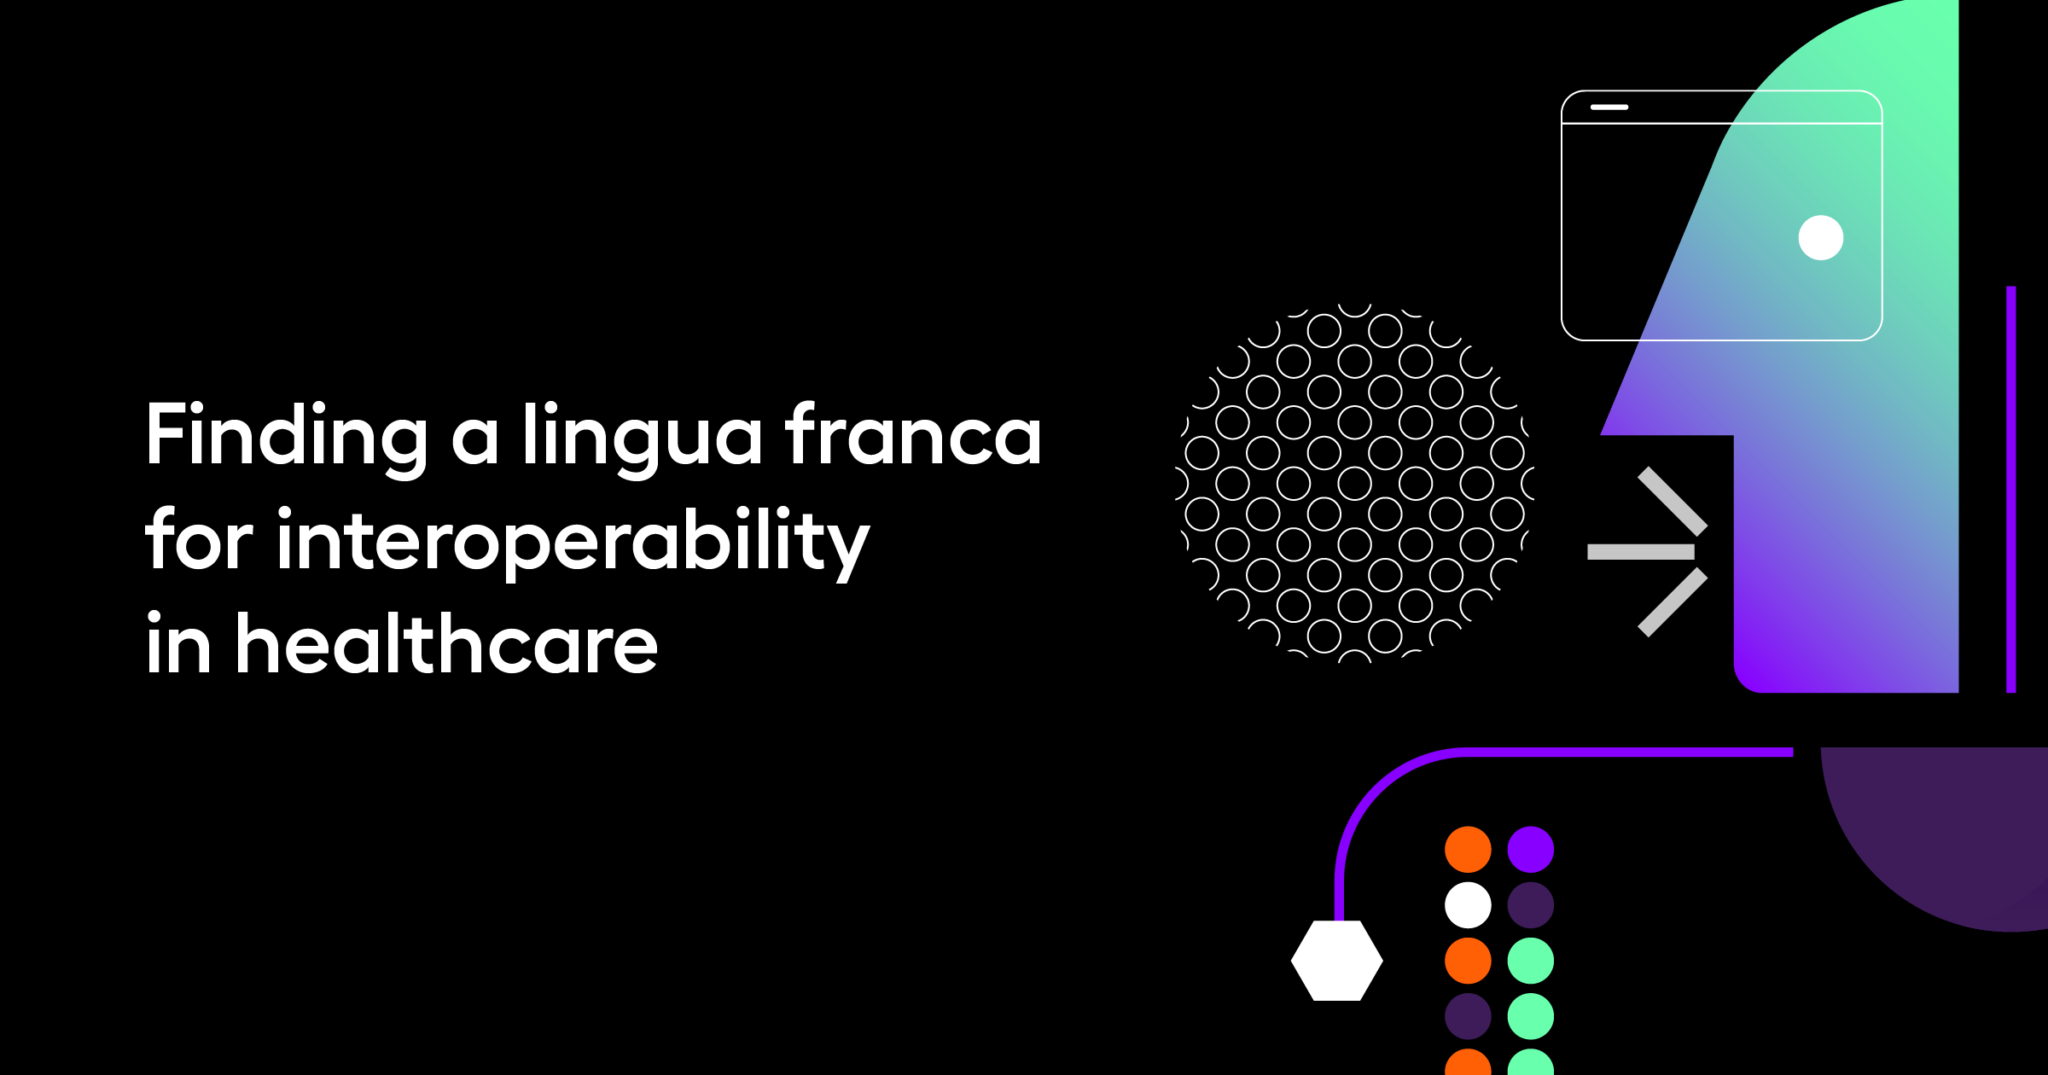 Finding a lingua franca for interoperability in healthcare